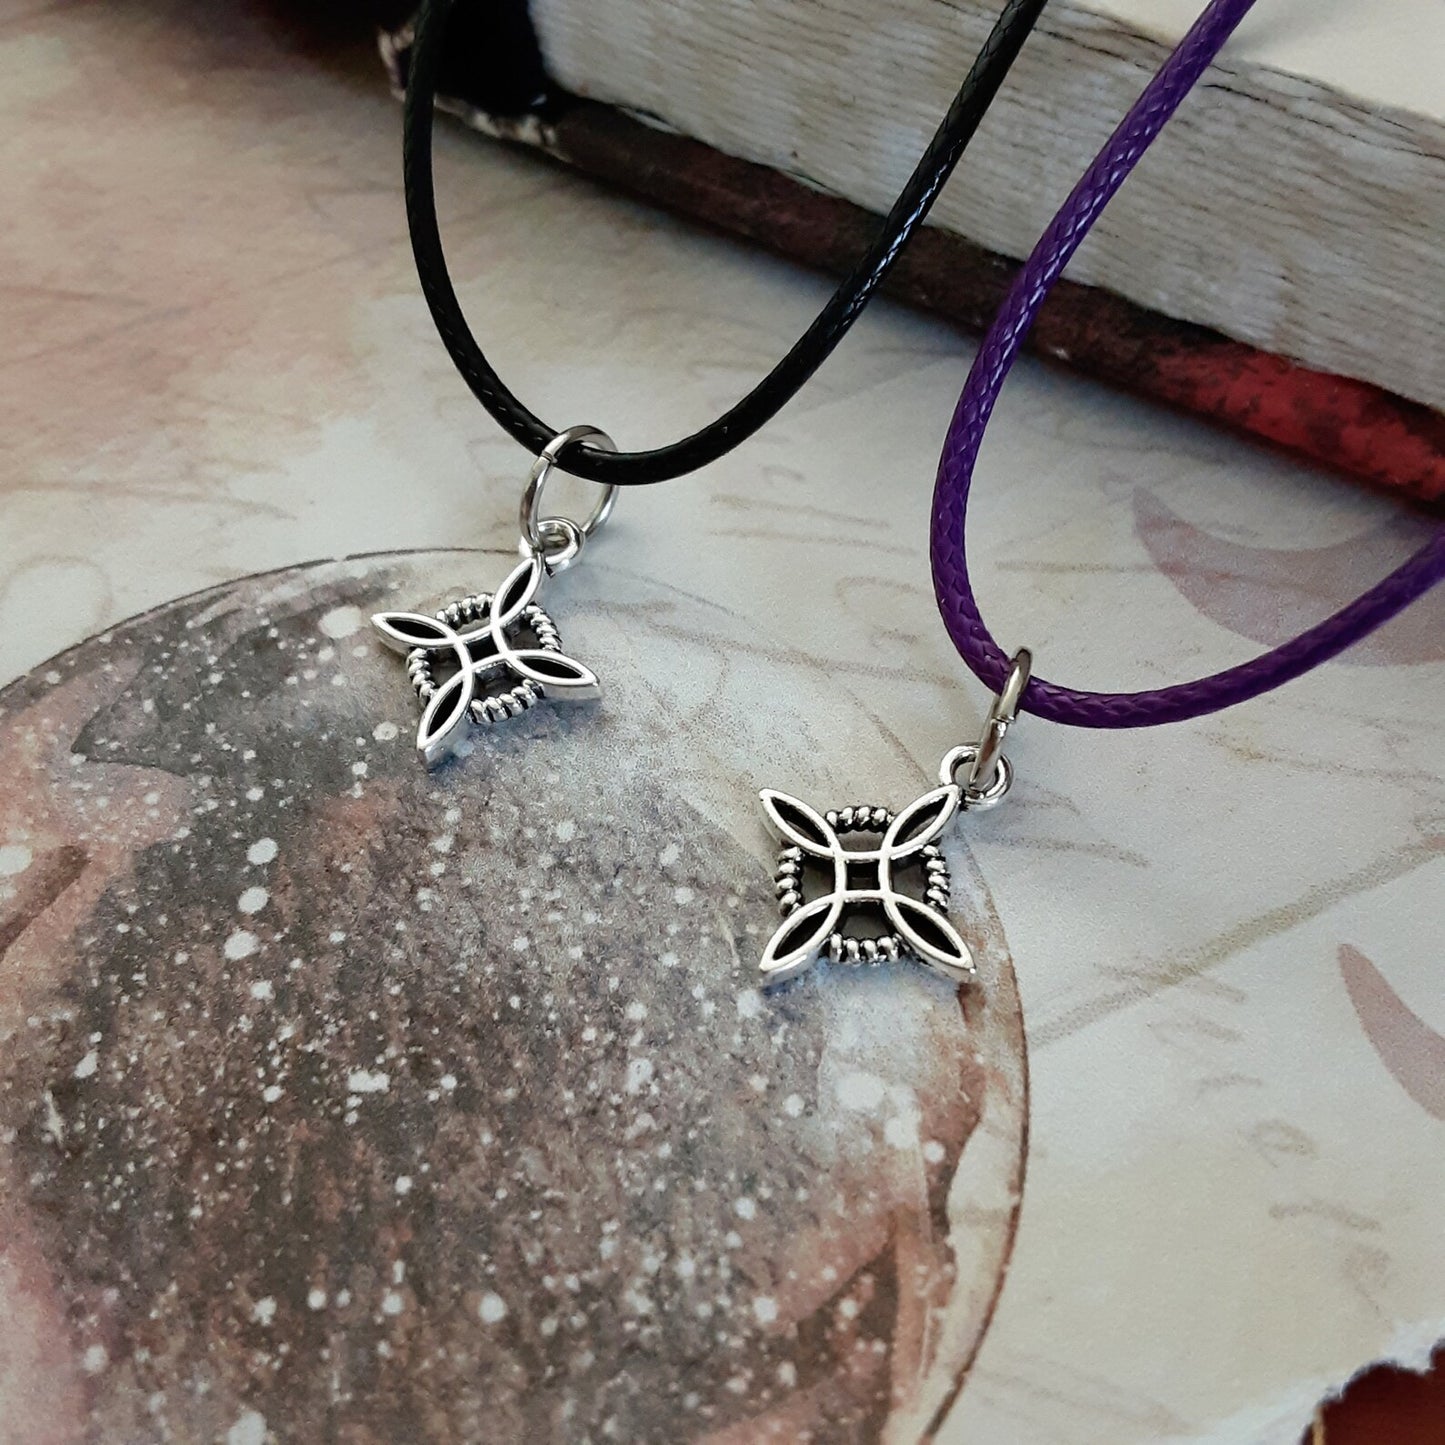 Witches Knot Protection Amulet Necklace Small dainty pendant, Pagan Witch Accessory, Choose Black or Purple cord, Magic Jewelry Minimalist